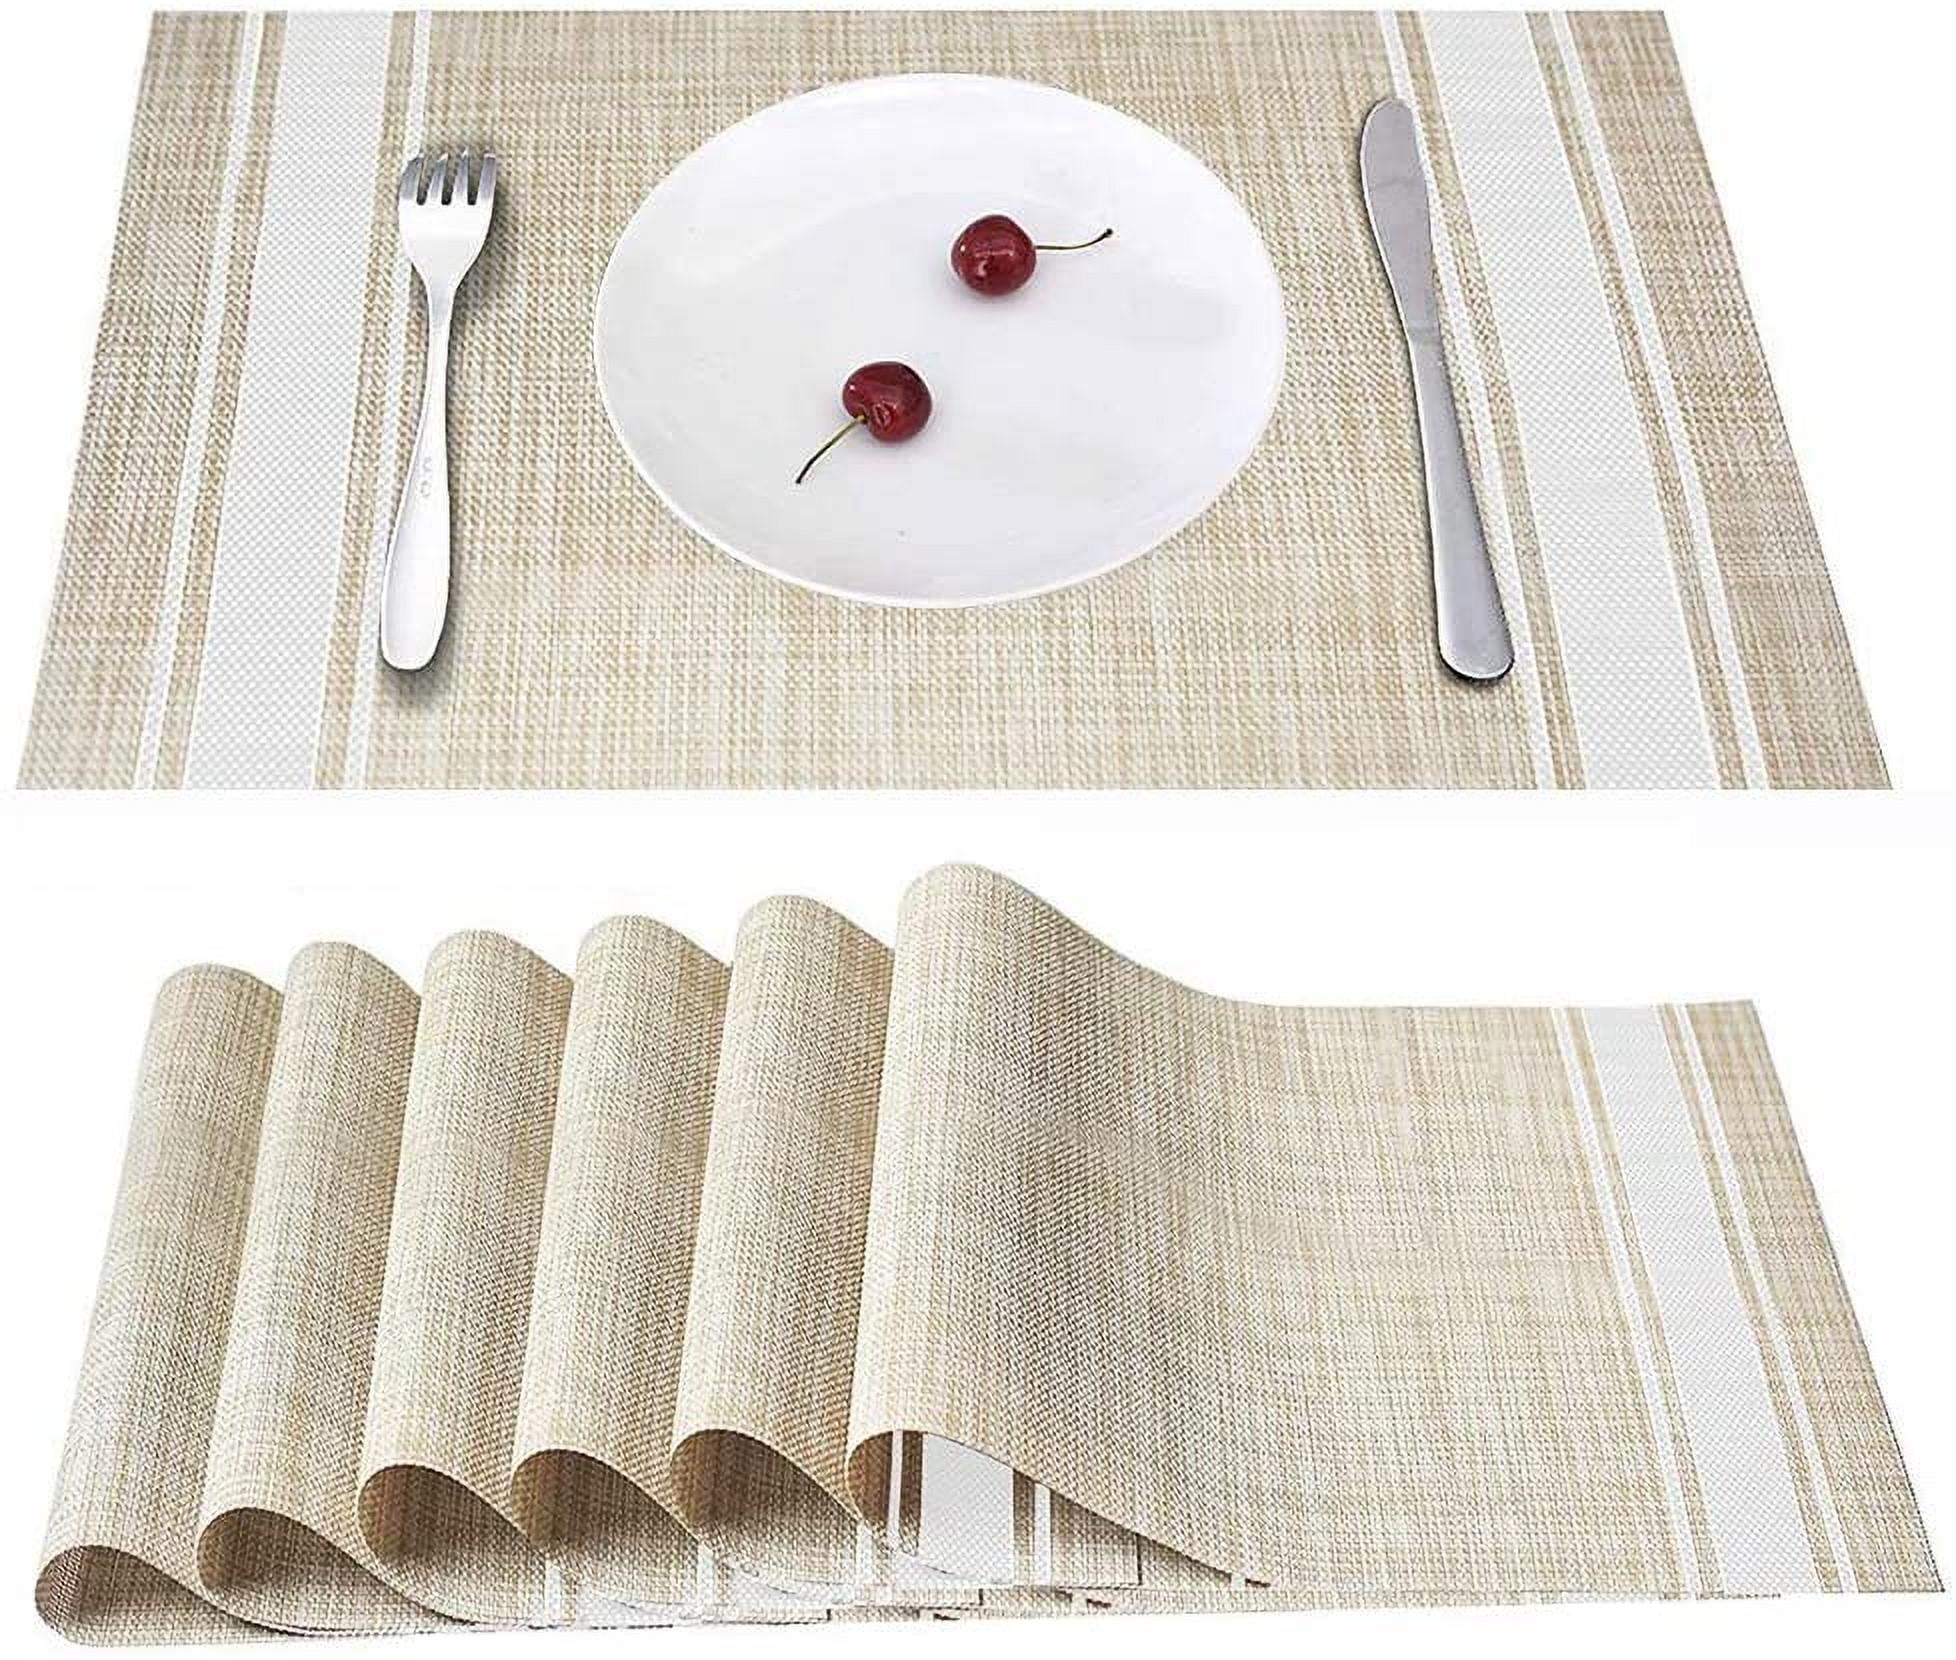 Placemats Set of 4 for Dining Table Heat-Resistant Non-Slip Table Mats Linen Placemats Small Colorful Flowers